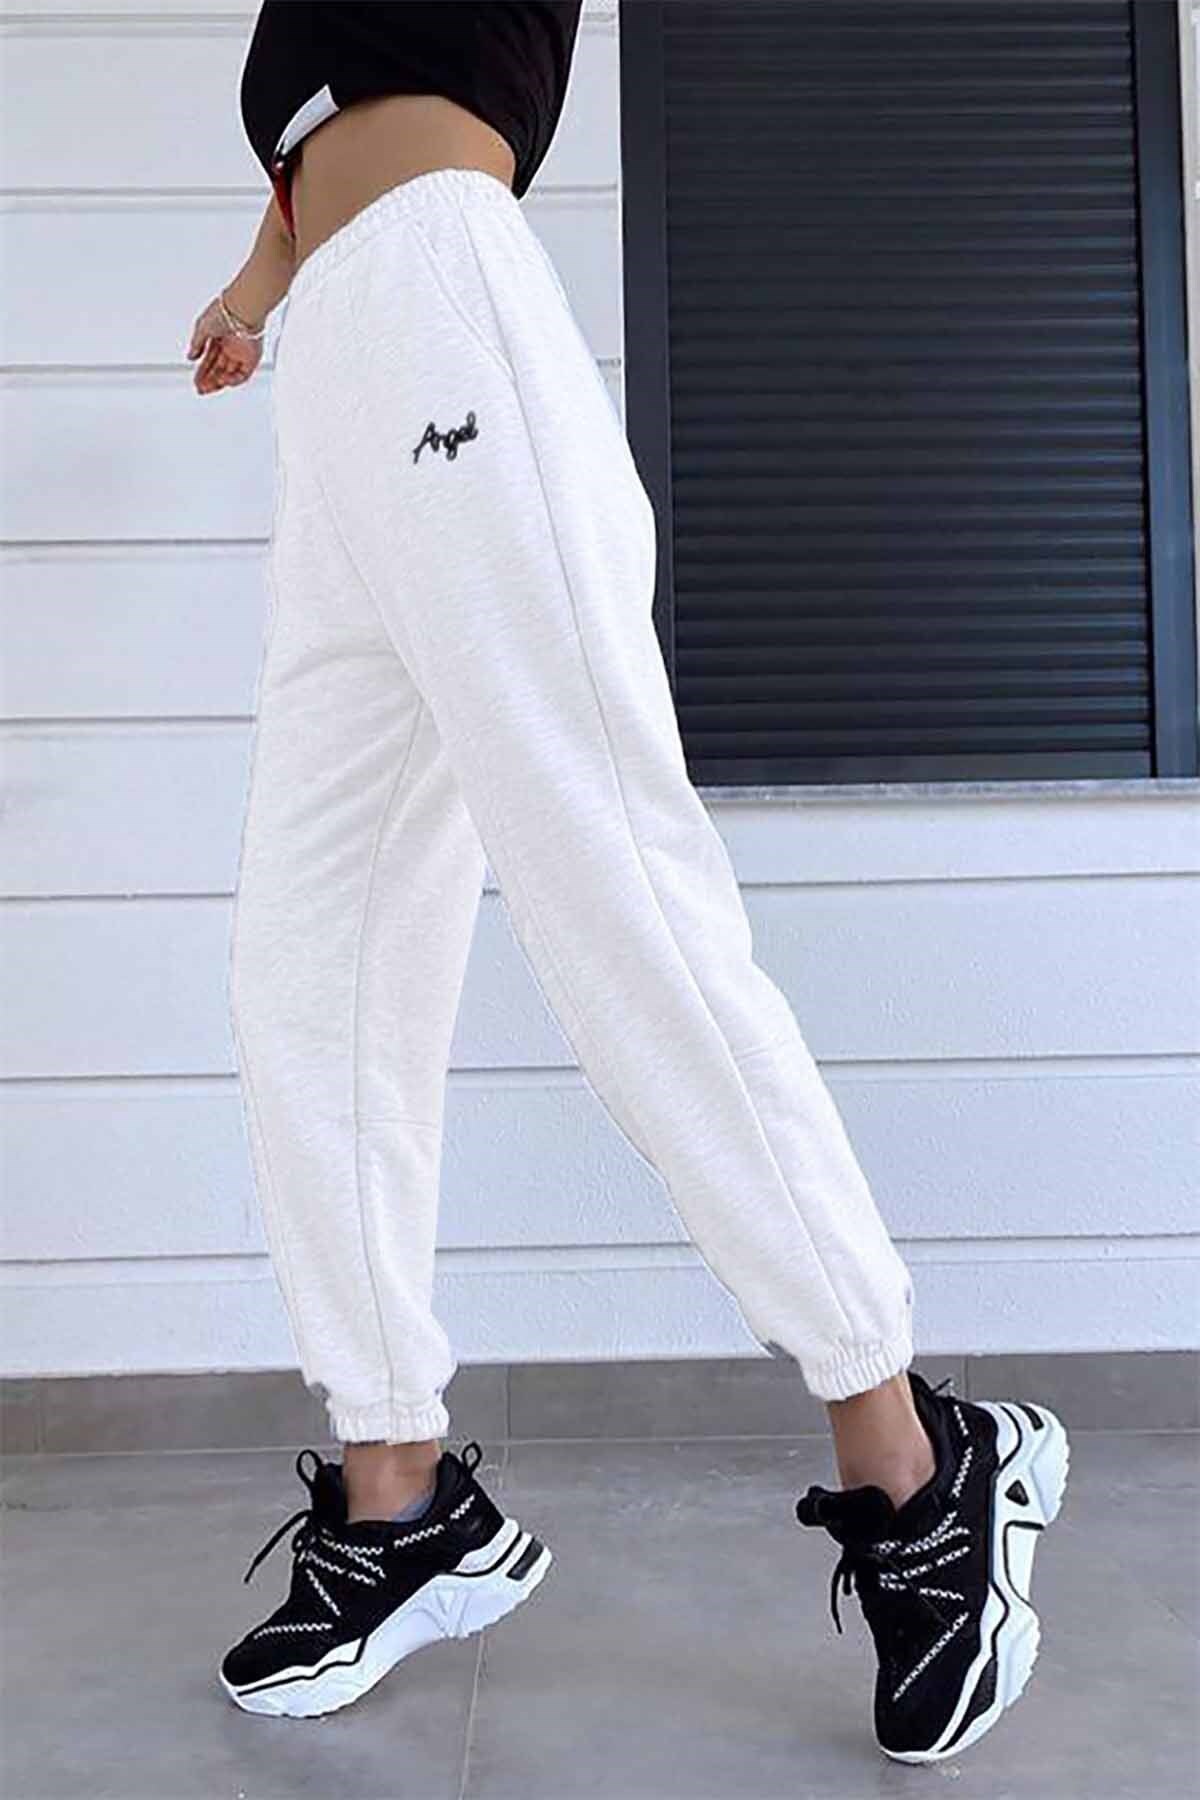 Madmext Women's White Mad Girls Tracksuit Mg817